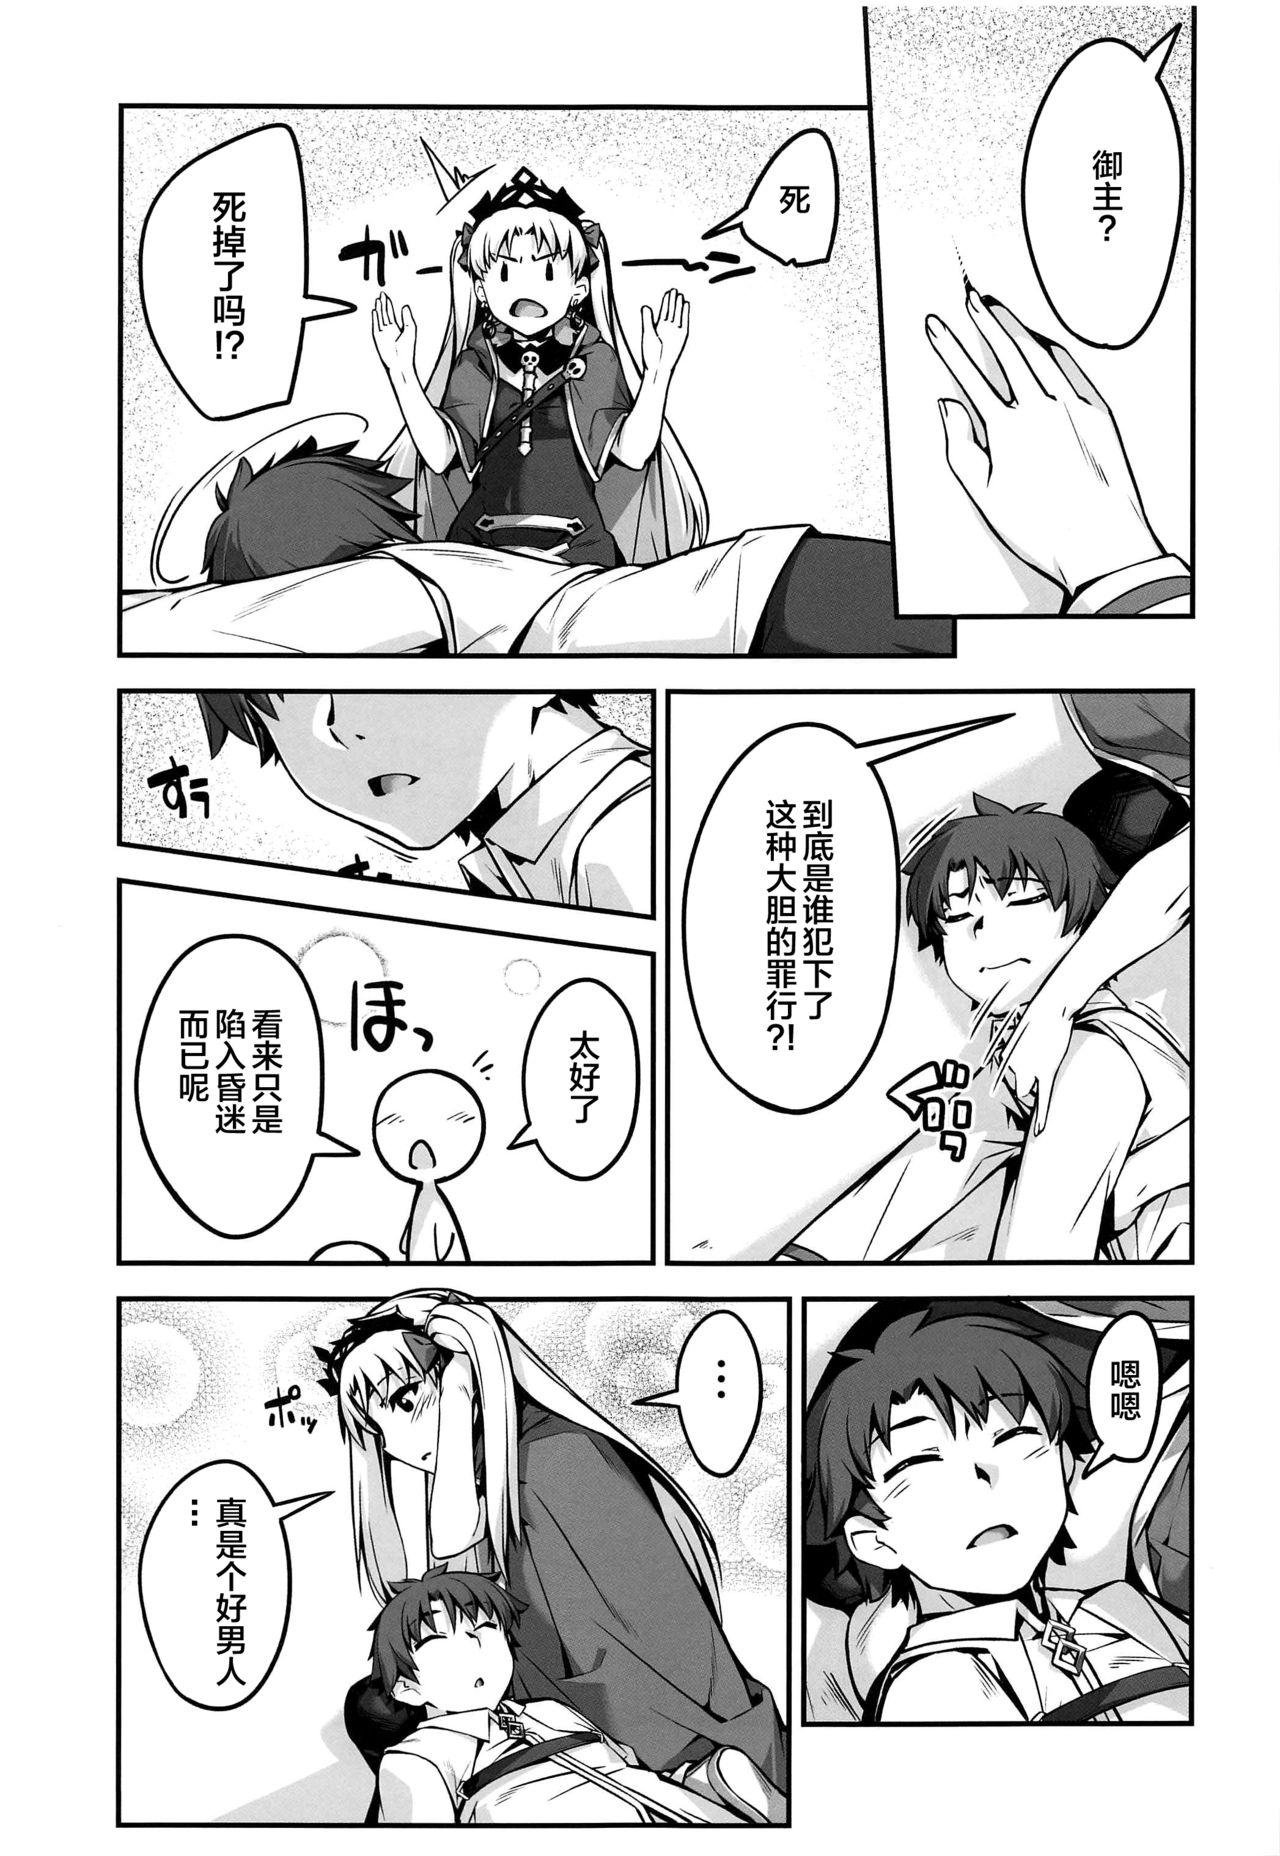 Topless Hiroigui. - Fate grand order Stepbrother - Page 4